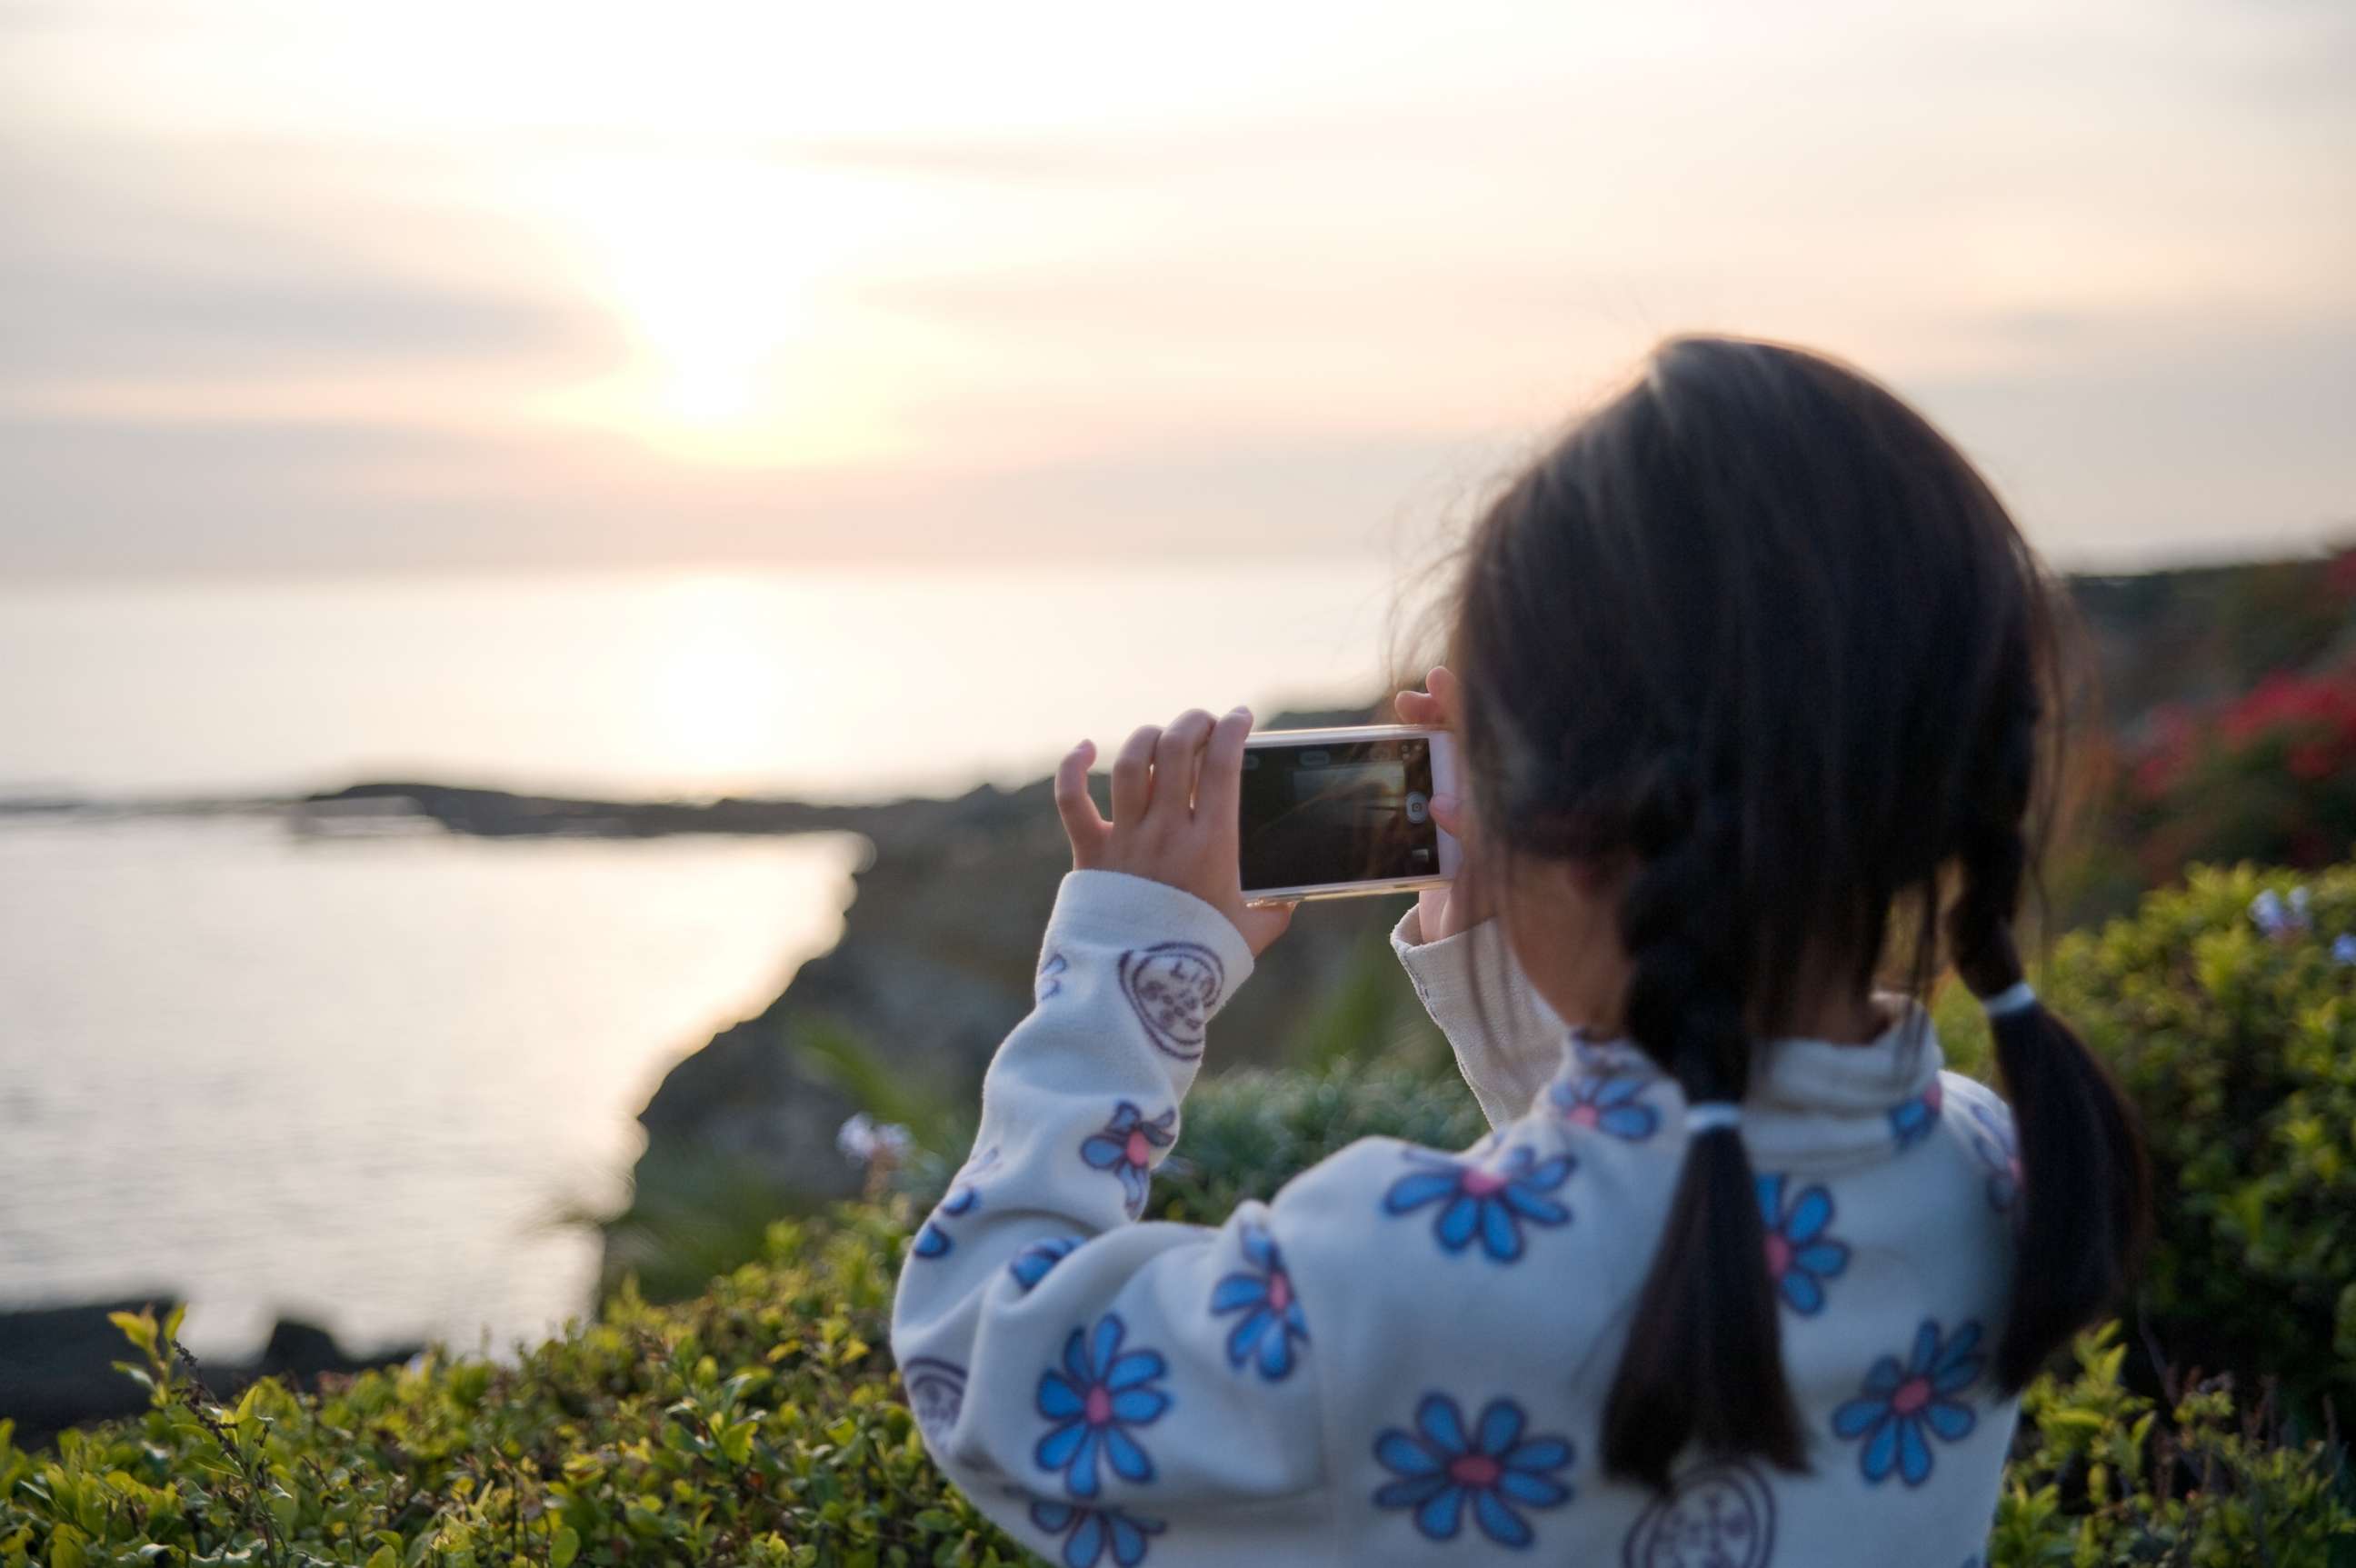 PHOTO:  A young girl photographs the sunset at the beach using a smartphone, Jan. 5, 2013  in Laguna, Calif.